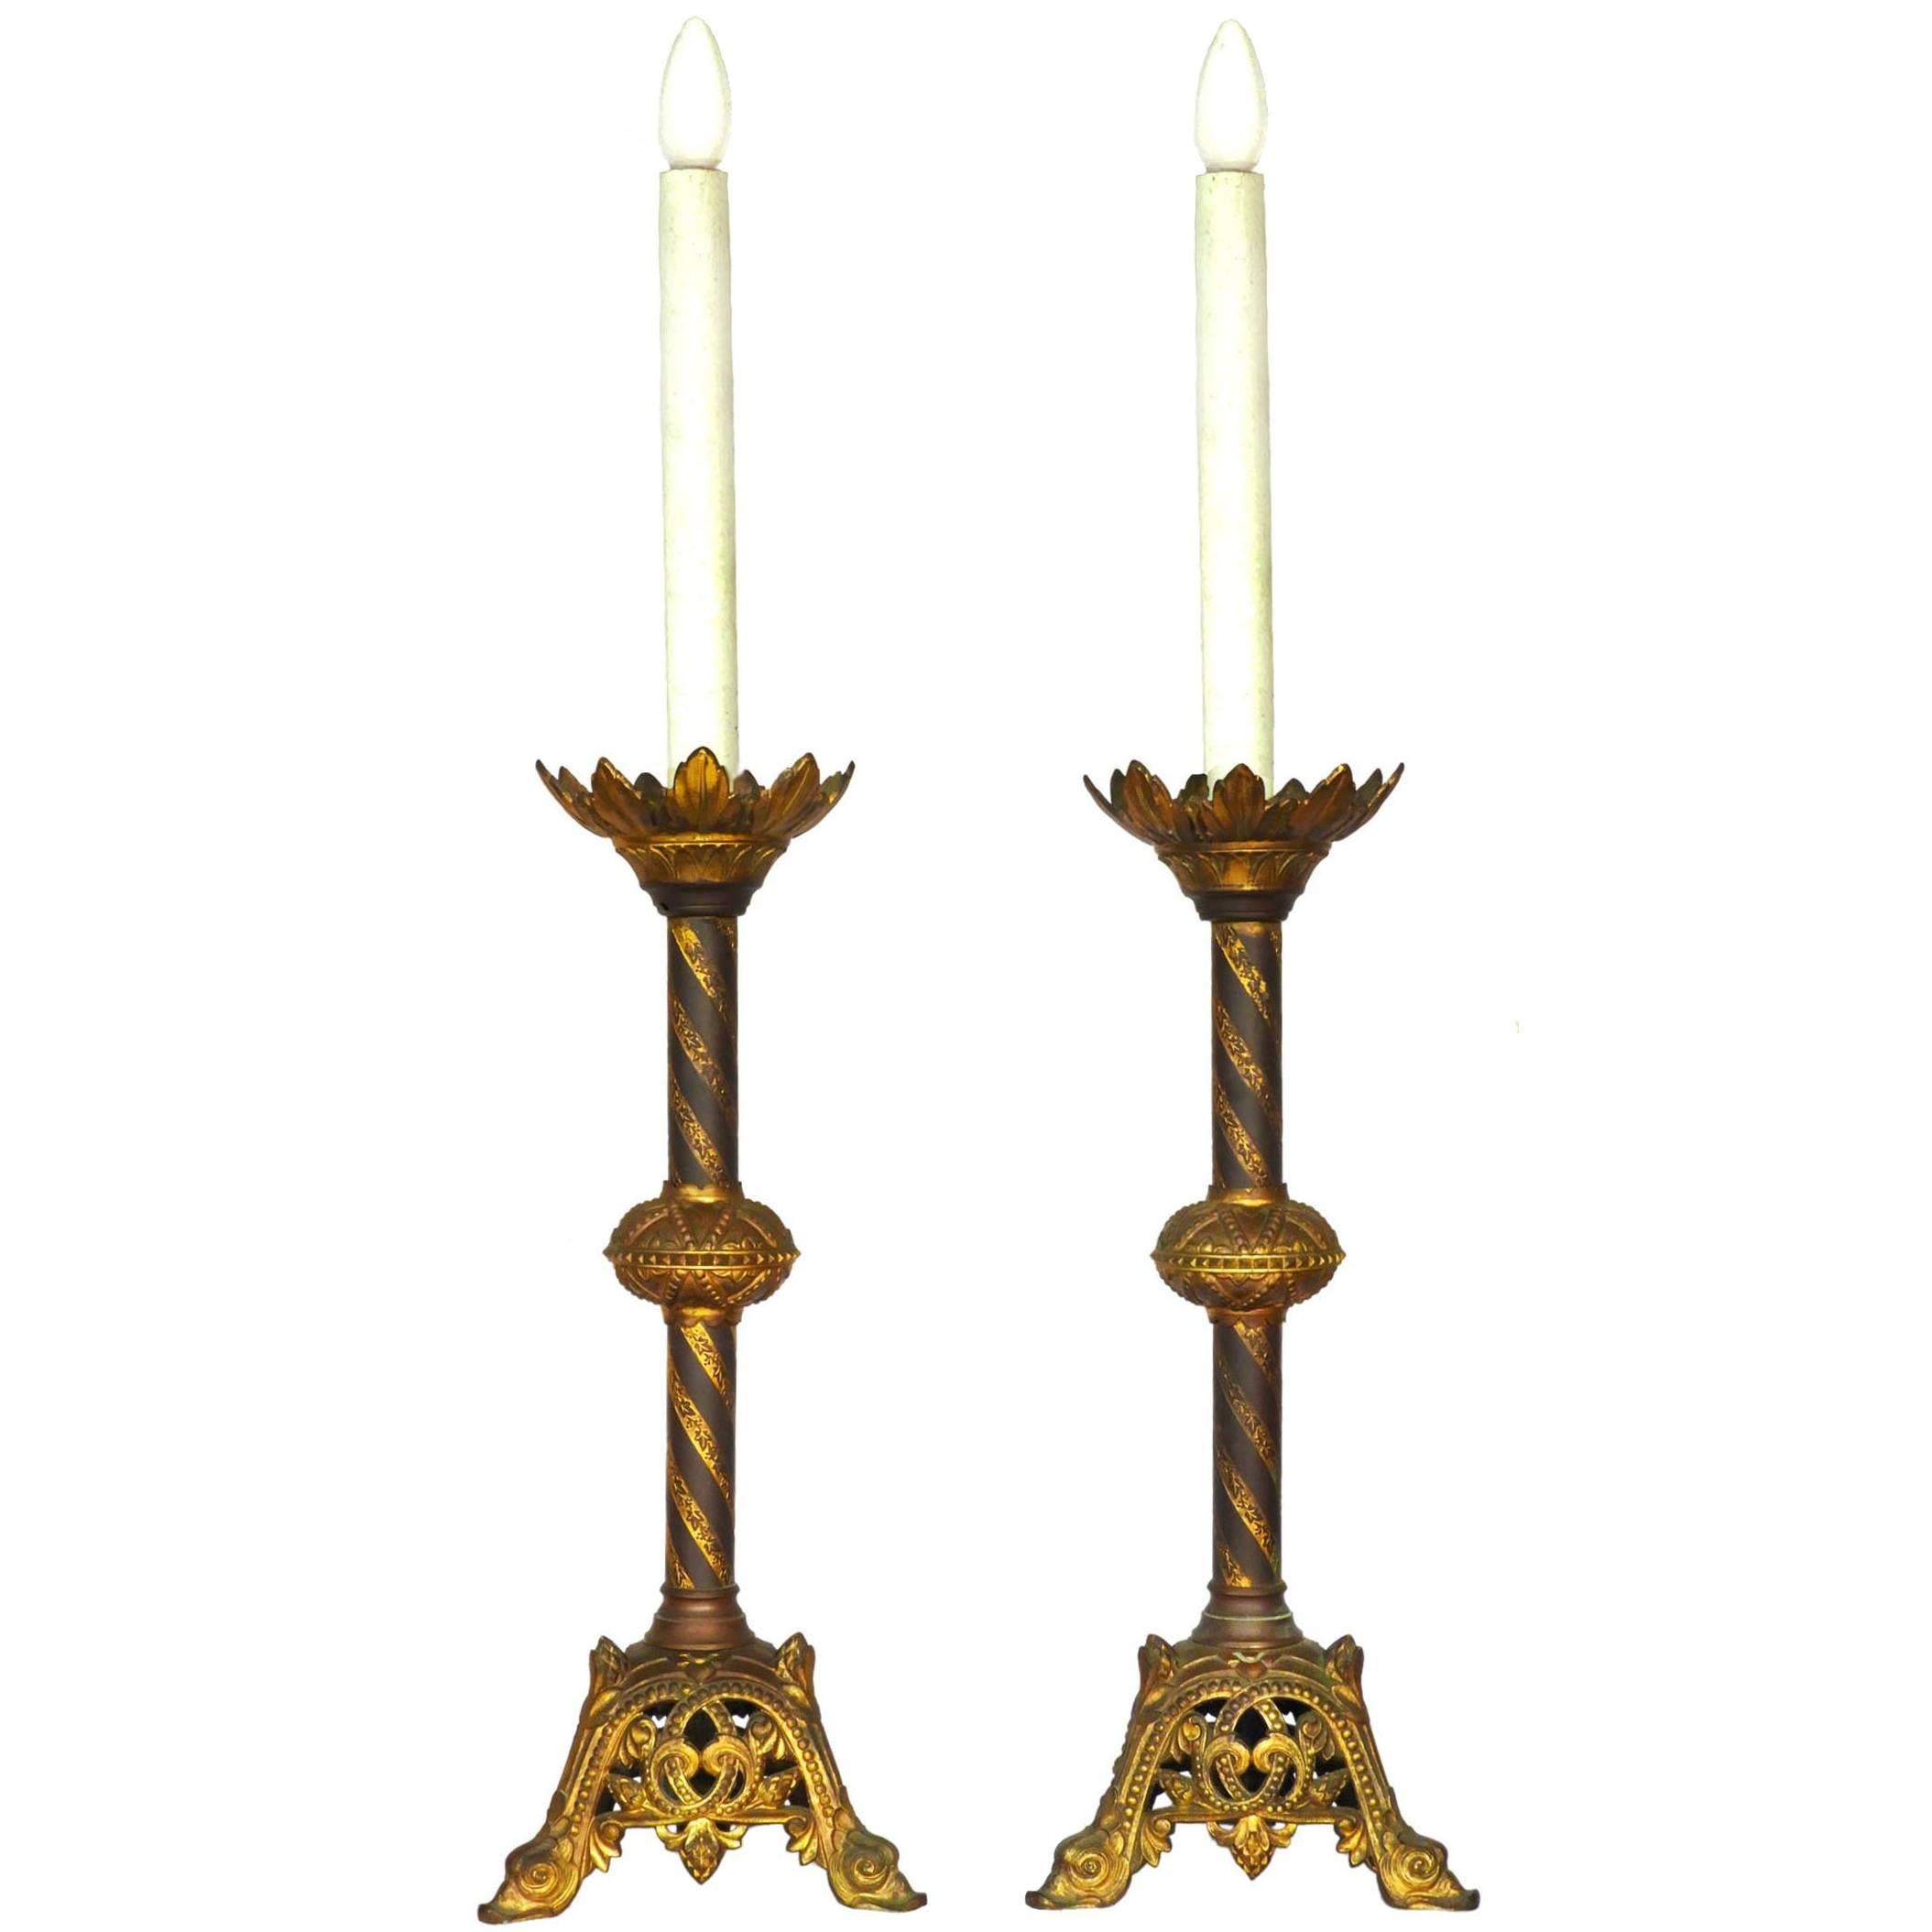 Pair of Candlestick Lamps French Church Gothic Revival, circa 1850